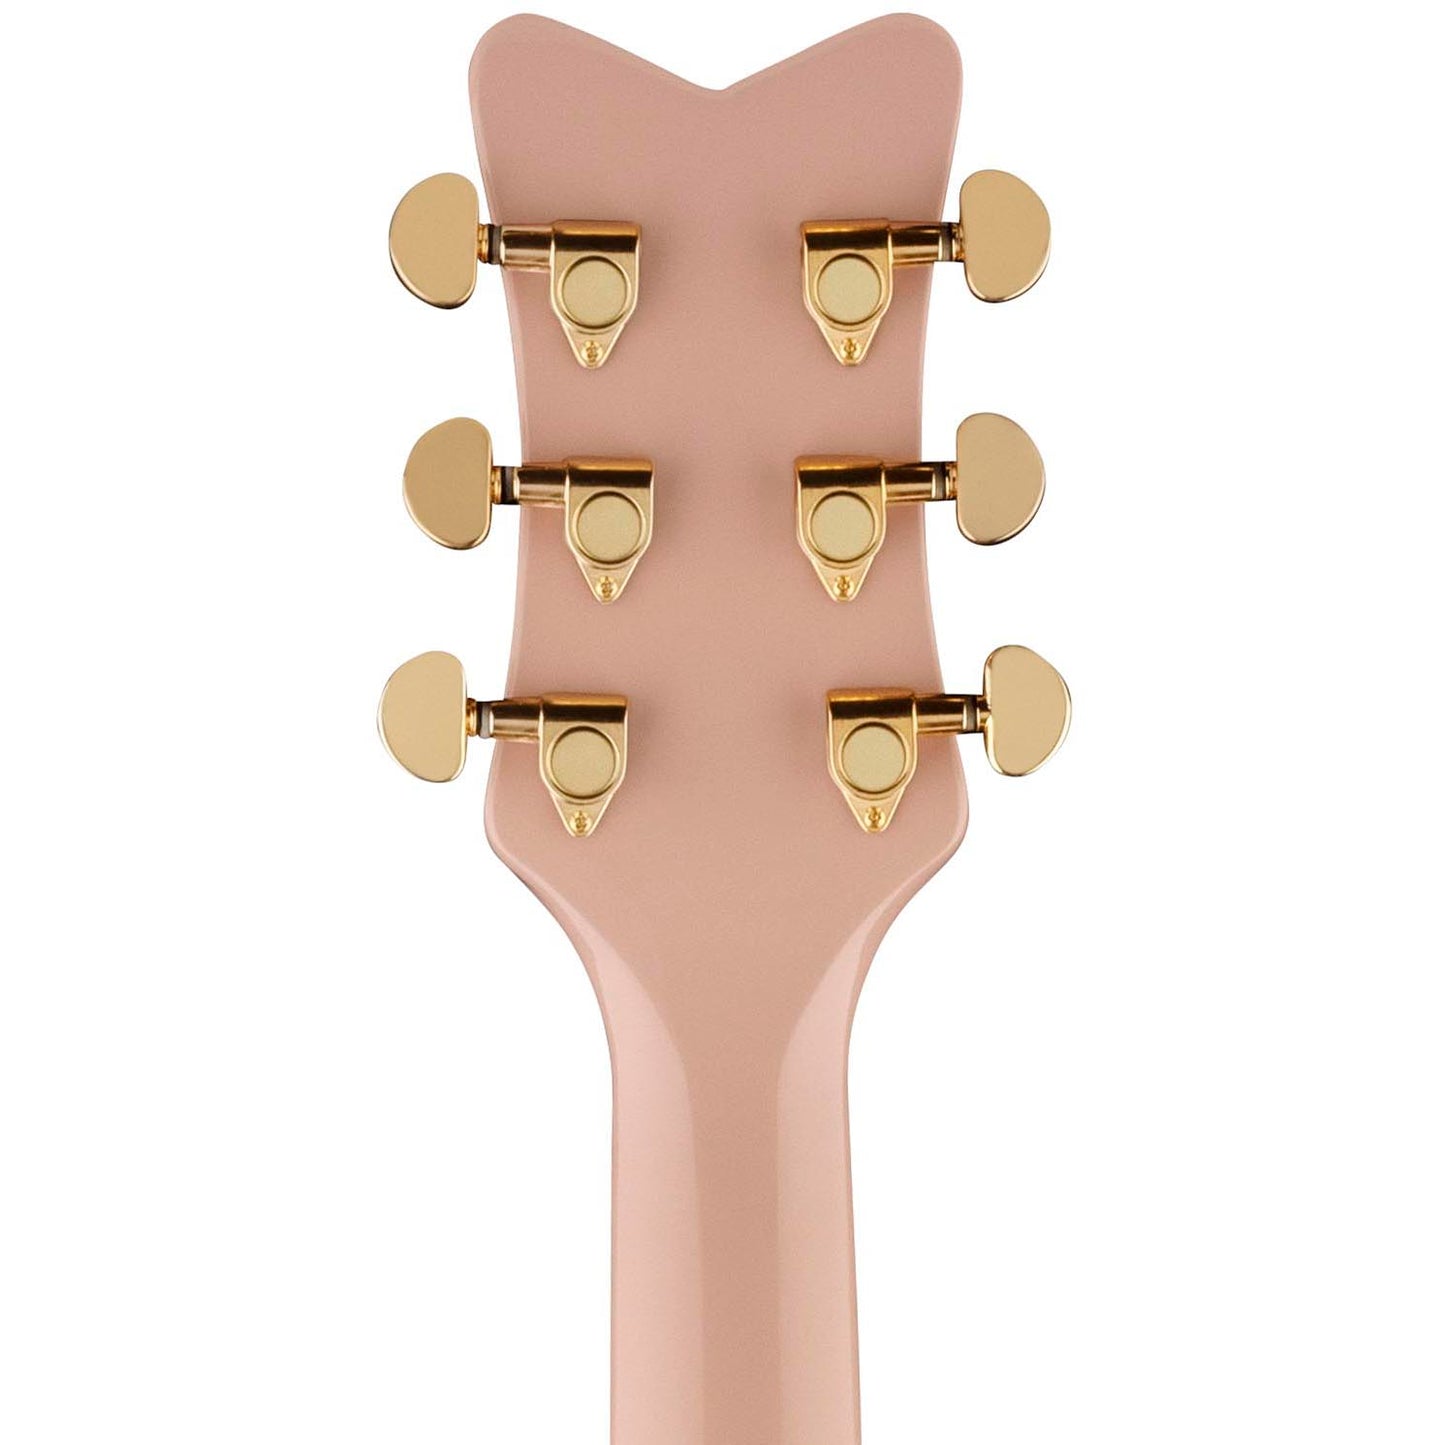 Gretsch G5021E Rancher™ Penguin™ Parlor Acoustic/Electric Guitar - Shell Pink